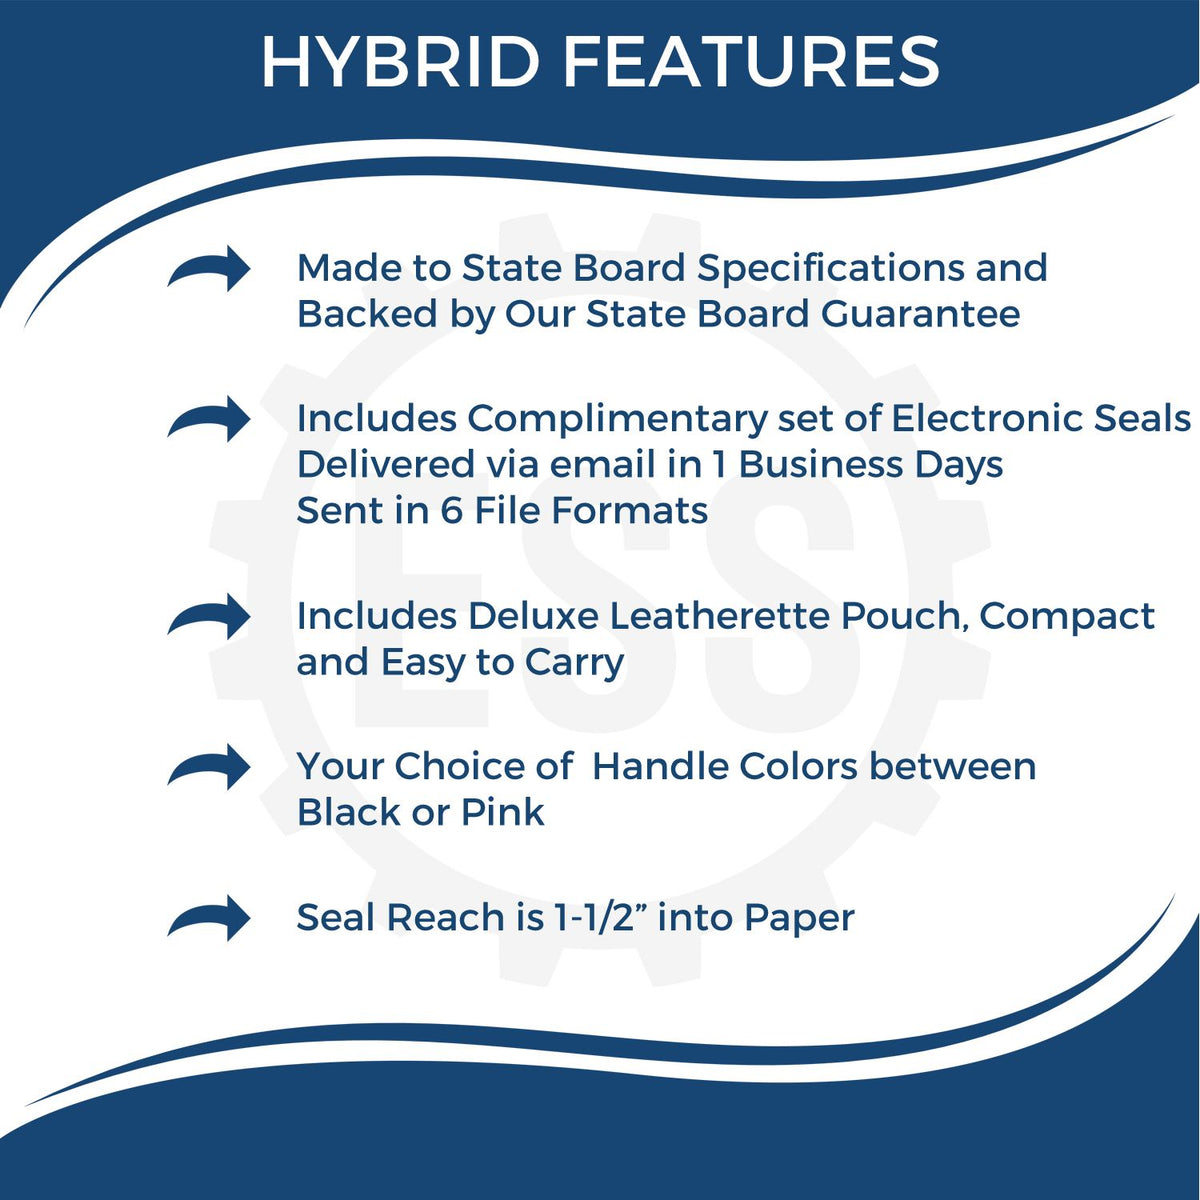 A picture of an infographic highlighting the selling points for the Hybrid Virginia Engineer Seal